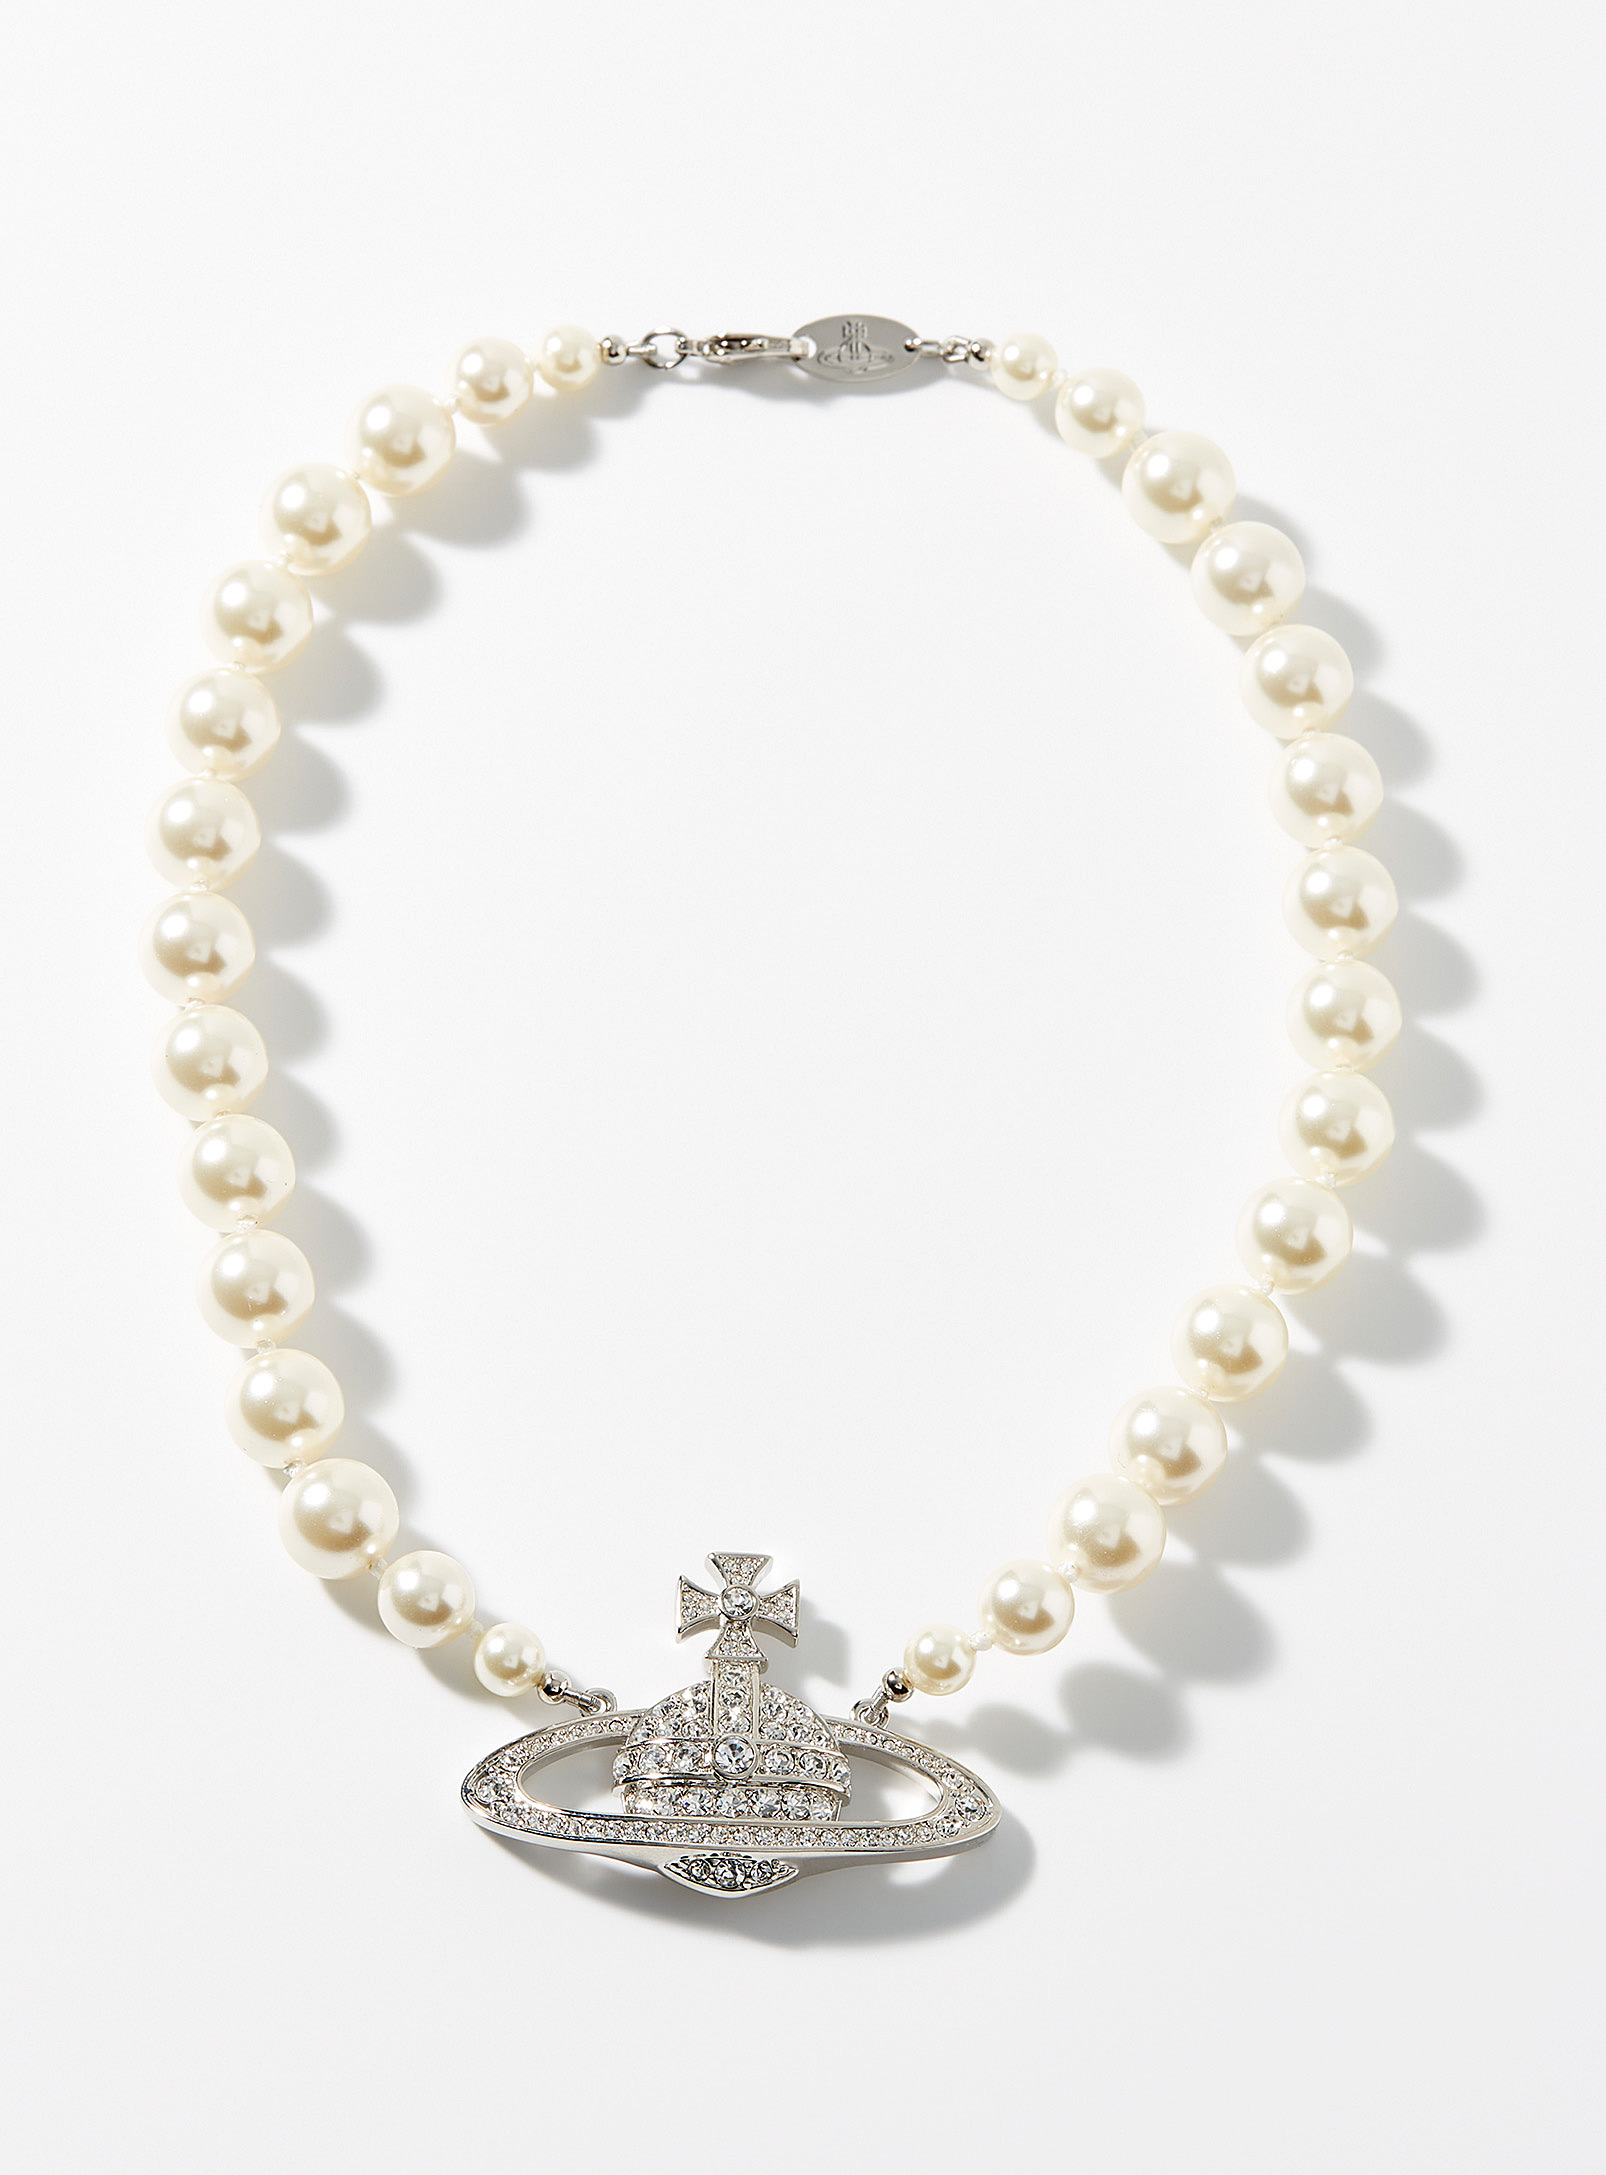 Vivienne Westwood Bas Relief Pearly Bead Necklace In Metallic